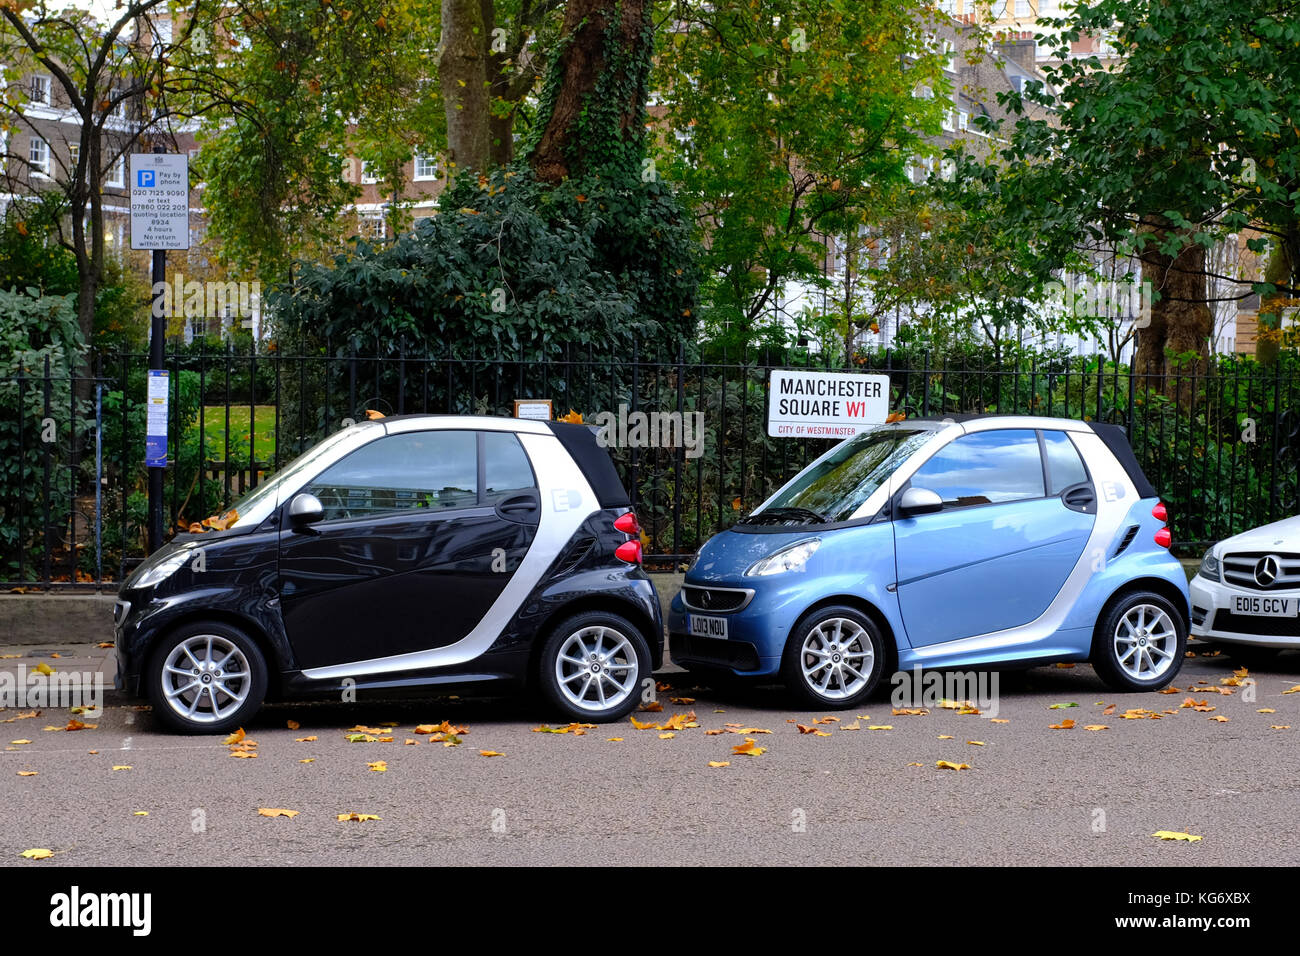 Smart Cars parked in Manchester Square London UK Stock Photo